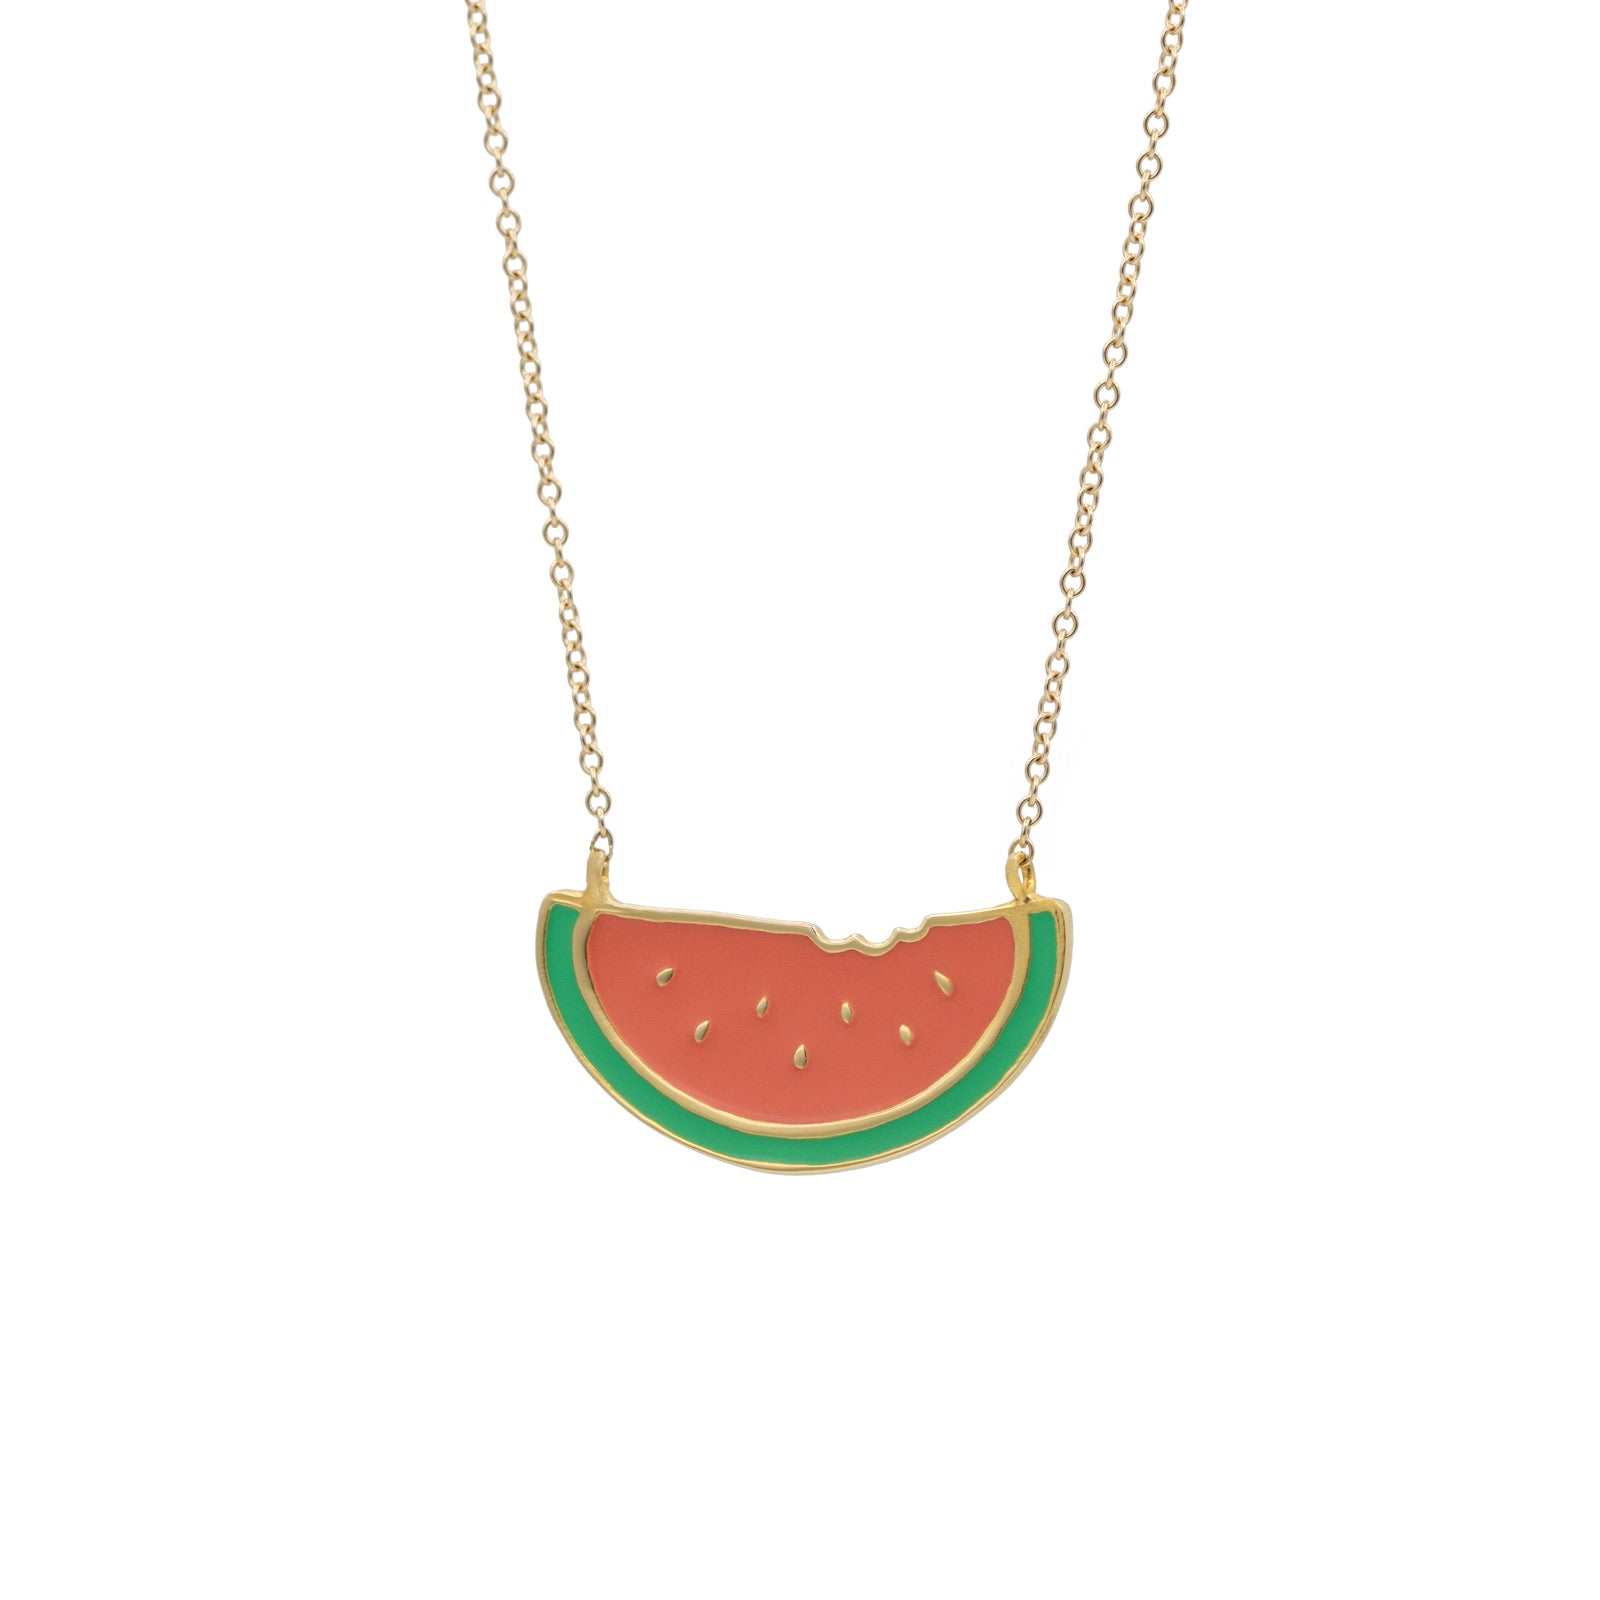 watermelon necklace with enamel on a gold filled chain